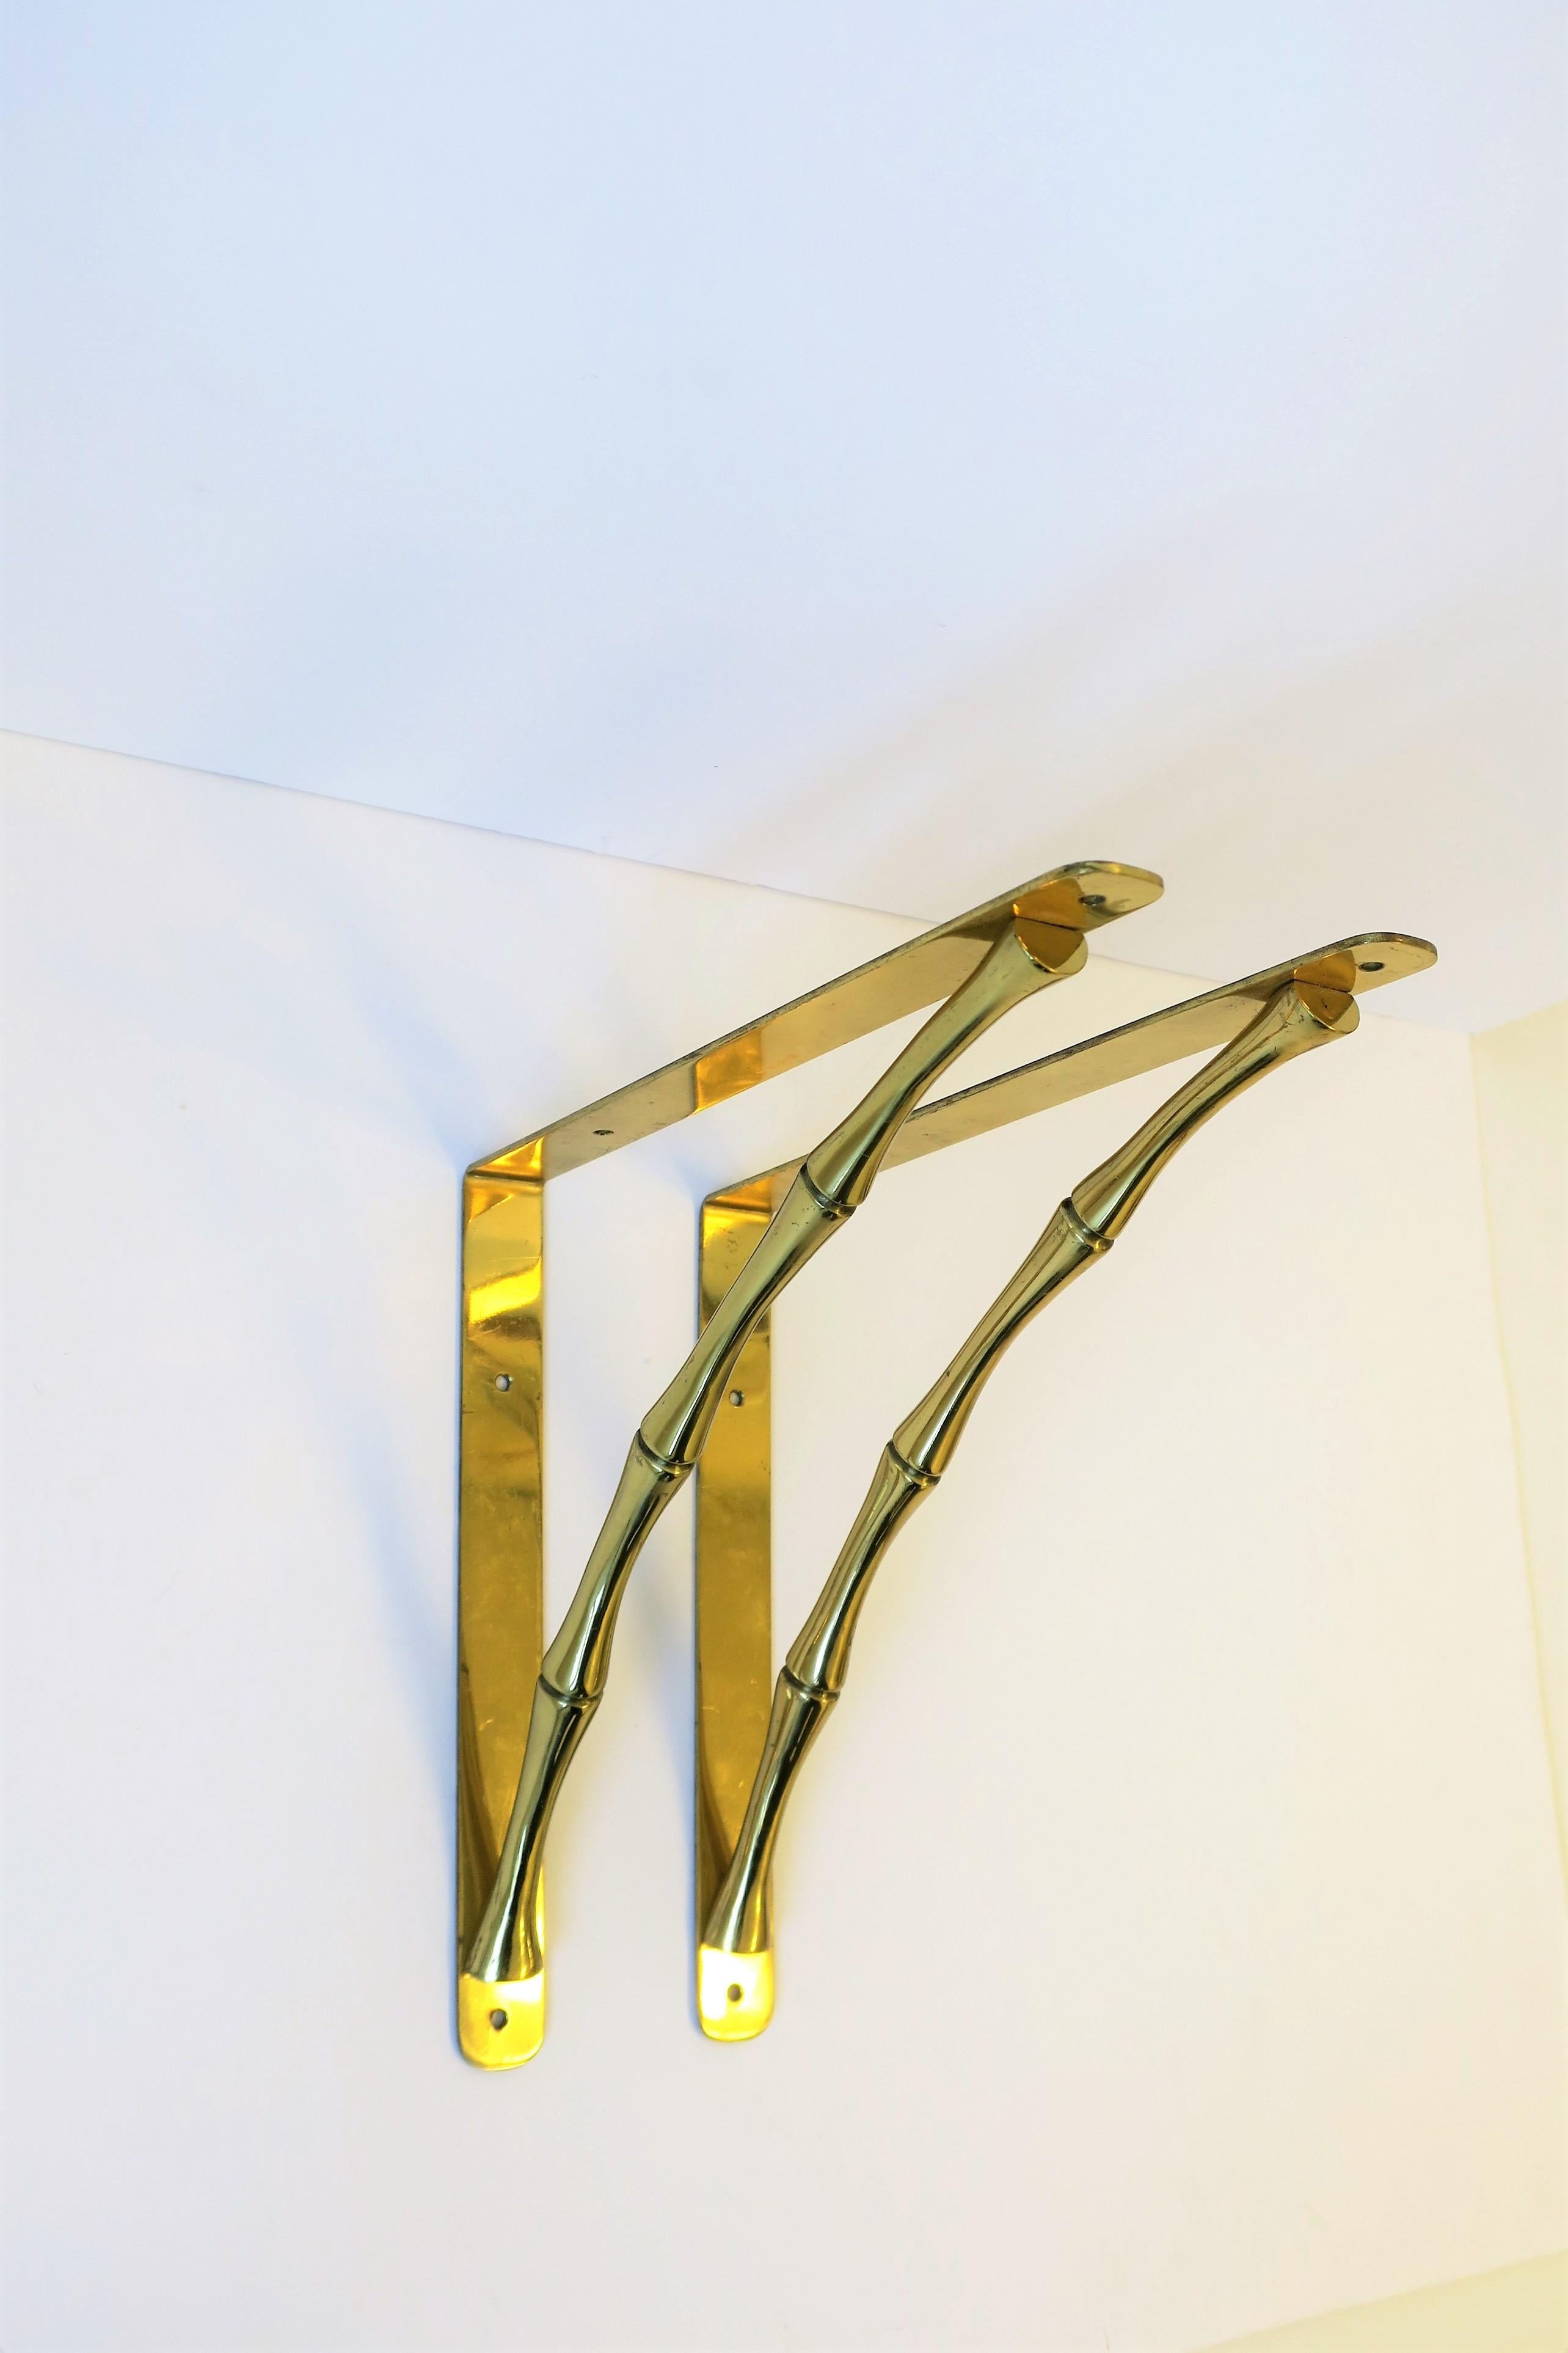 A beautiful pair of substantial brass hardware wall shelf brackets with bamboo design, circa mid-20th century. Brackets are a nice size measuring 10.75 inch deep from wall or, alternatively, 9.75 inches deep from wall - all depends on which side you